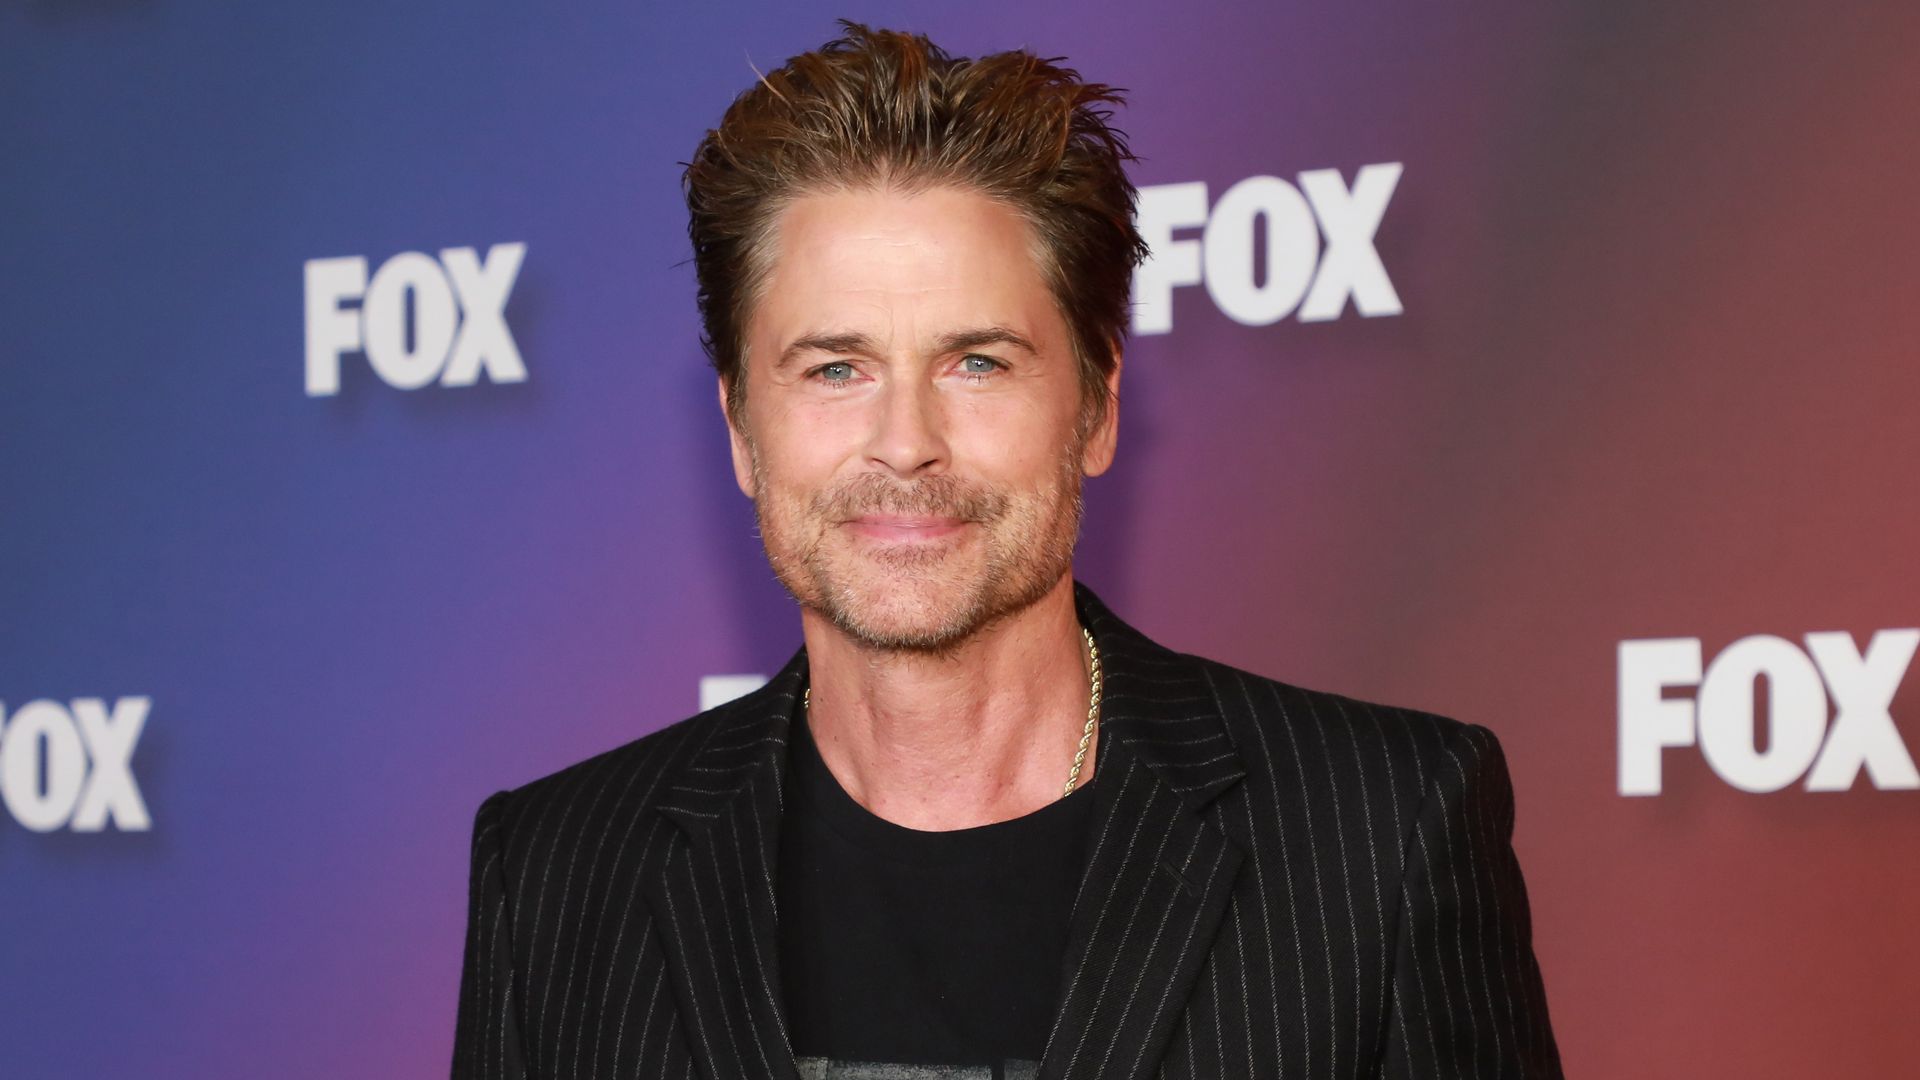 NEW YORK, NEW YORK - MAY 16: Rob Lowe attends the 2022 Fox Upfront on May 16, 2022 in New York City. (Photo by Jason Mendez/WireImage)